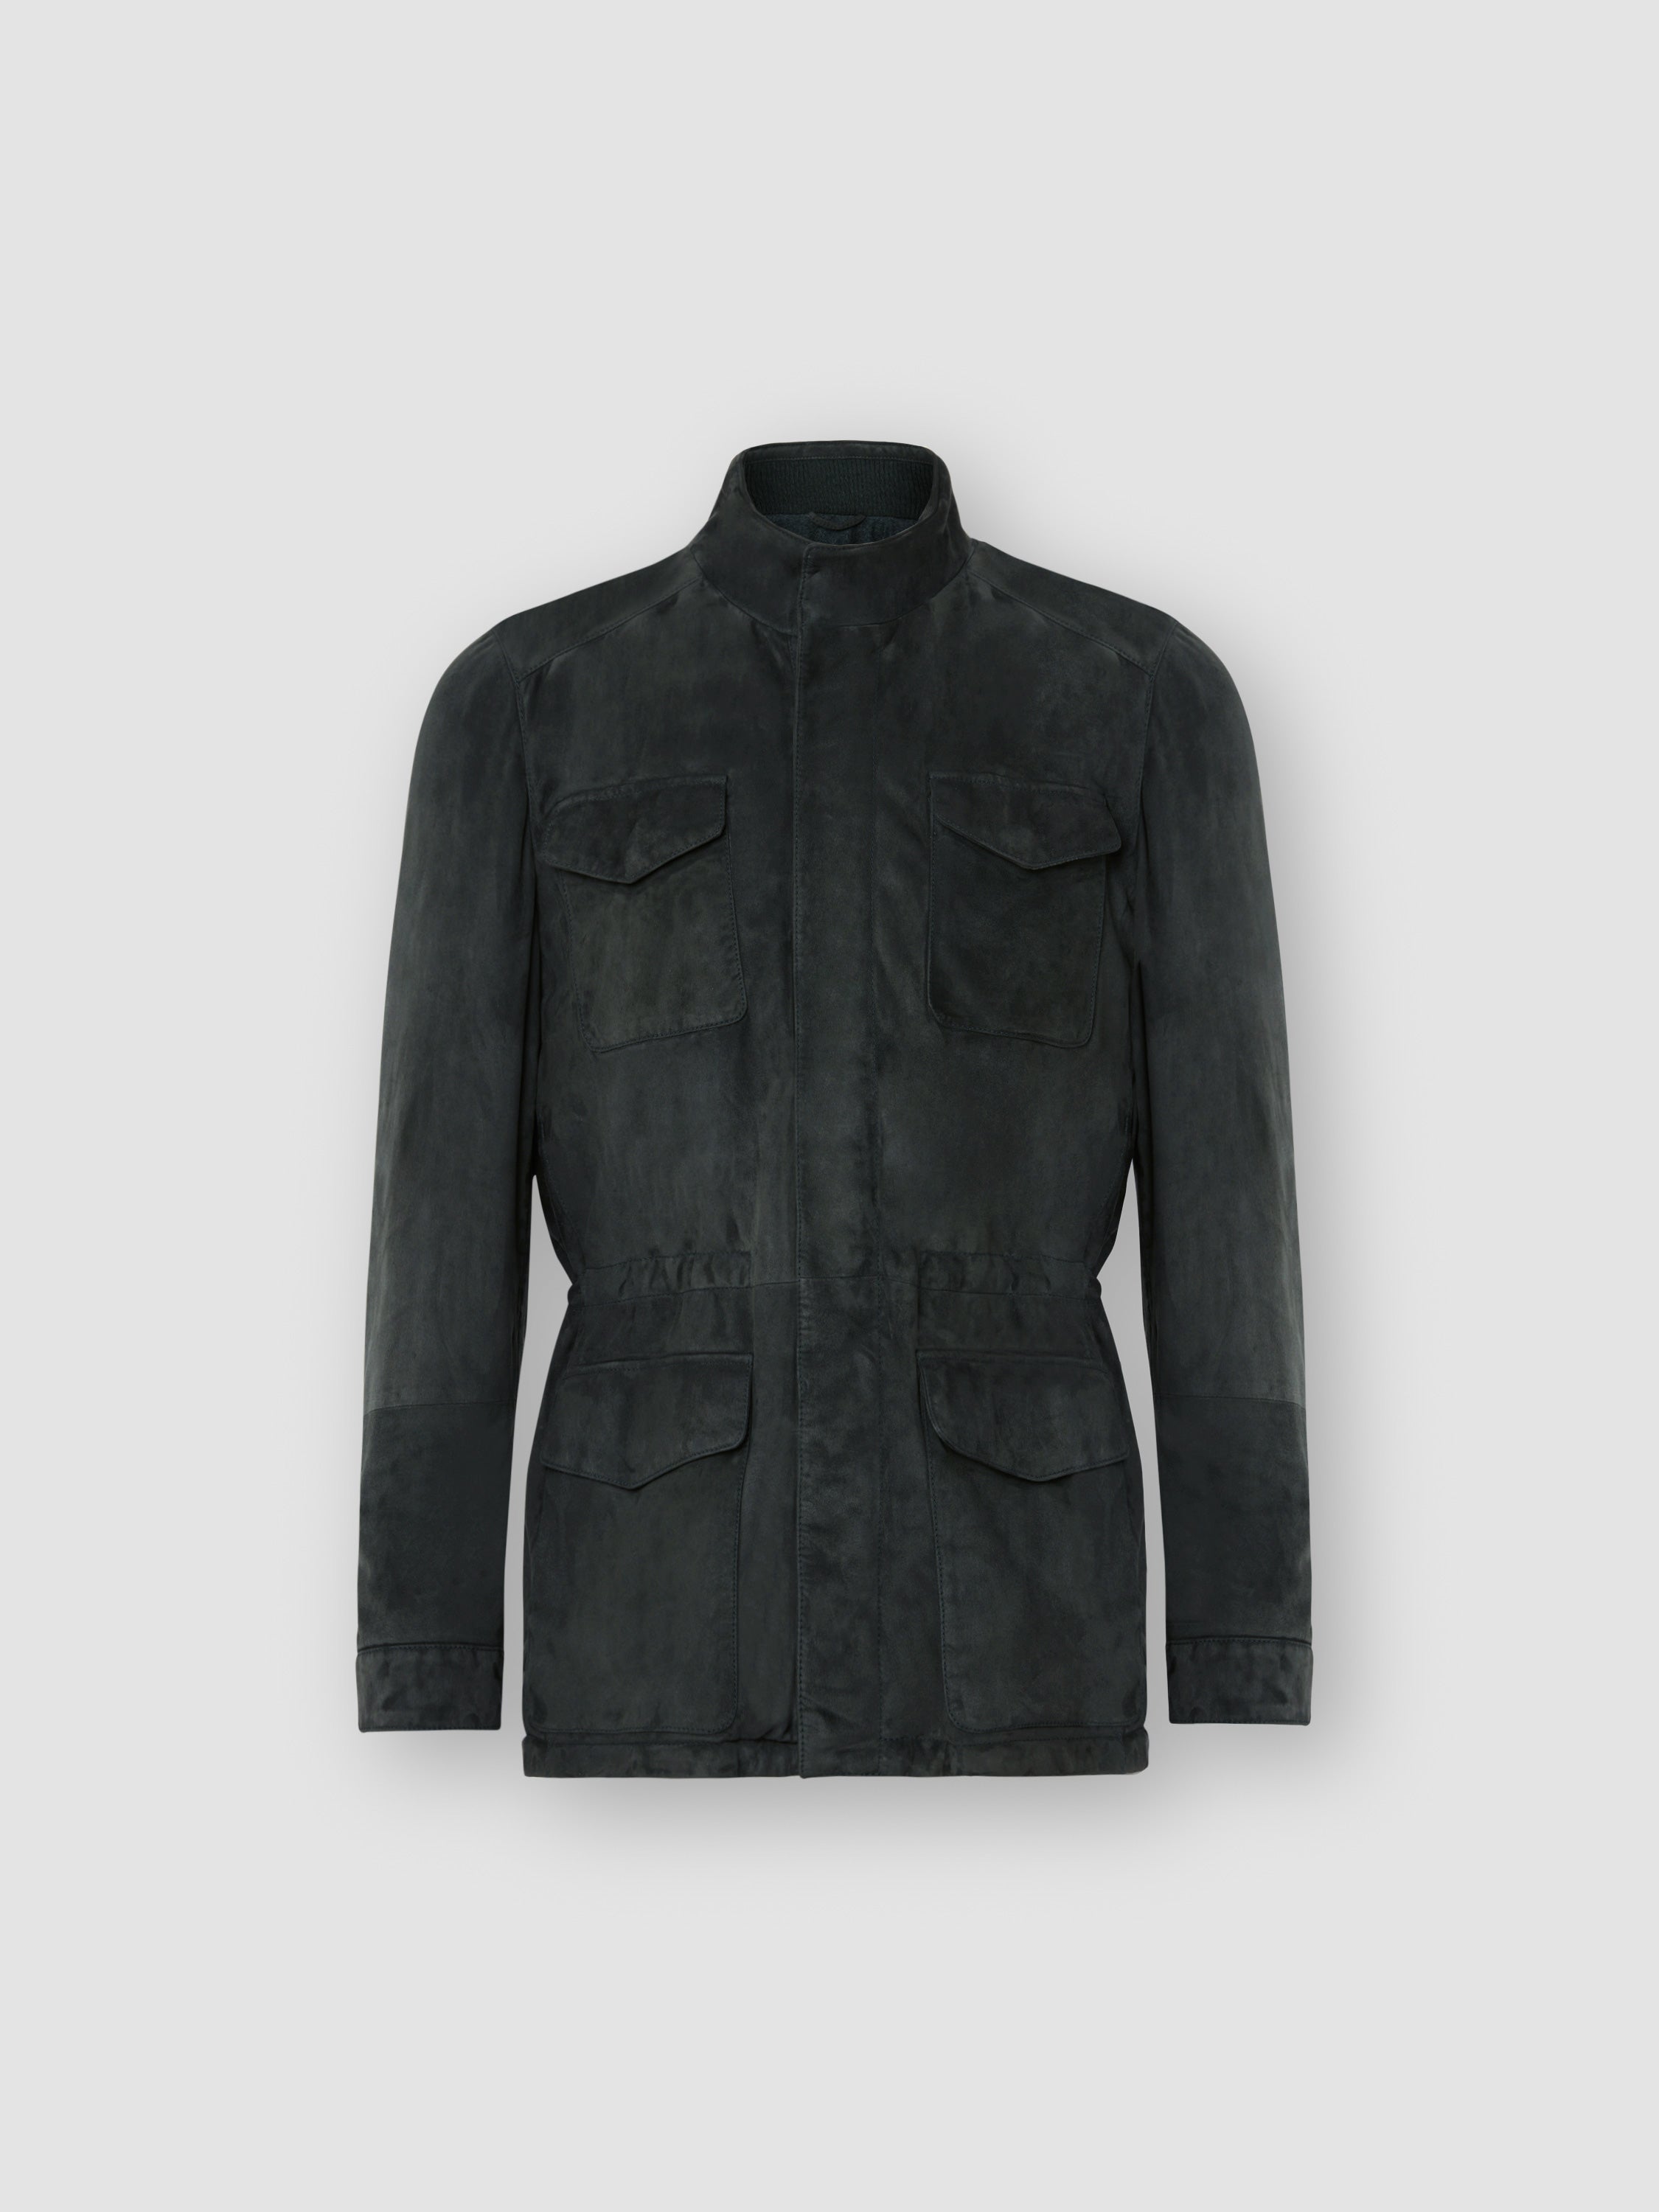 Cashmere Lined Suede Safari Jacket Darkest Green Product Image